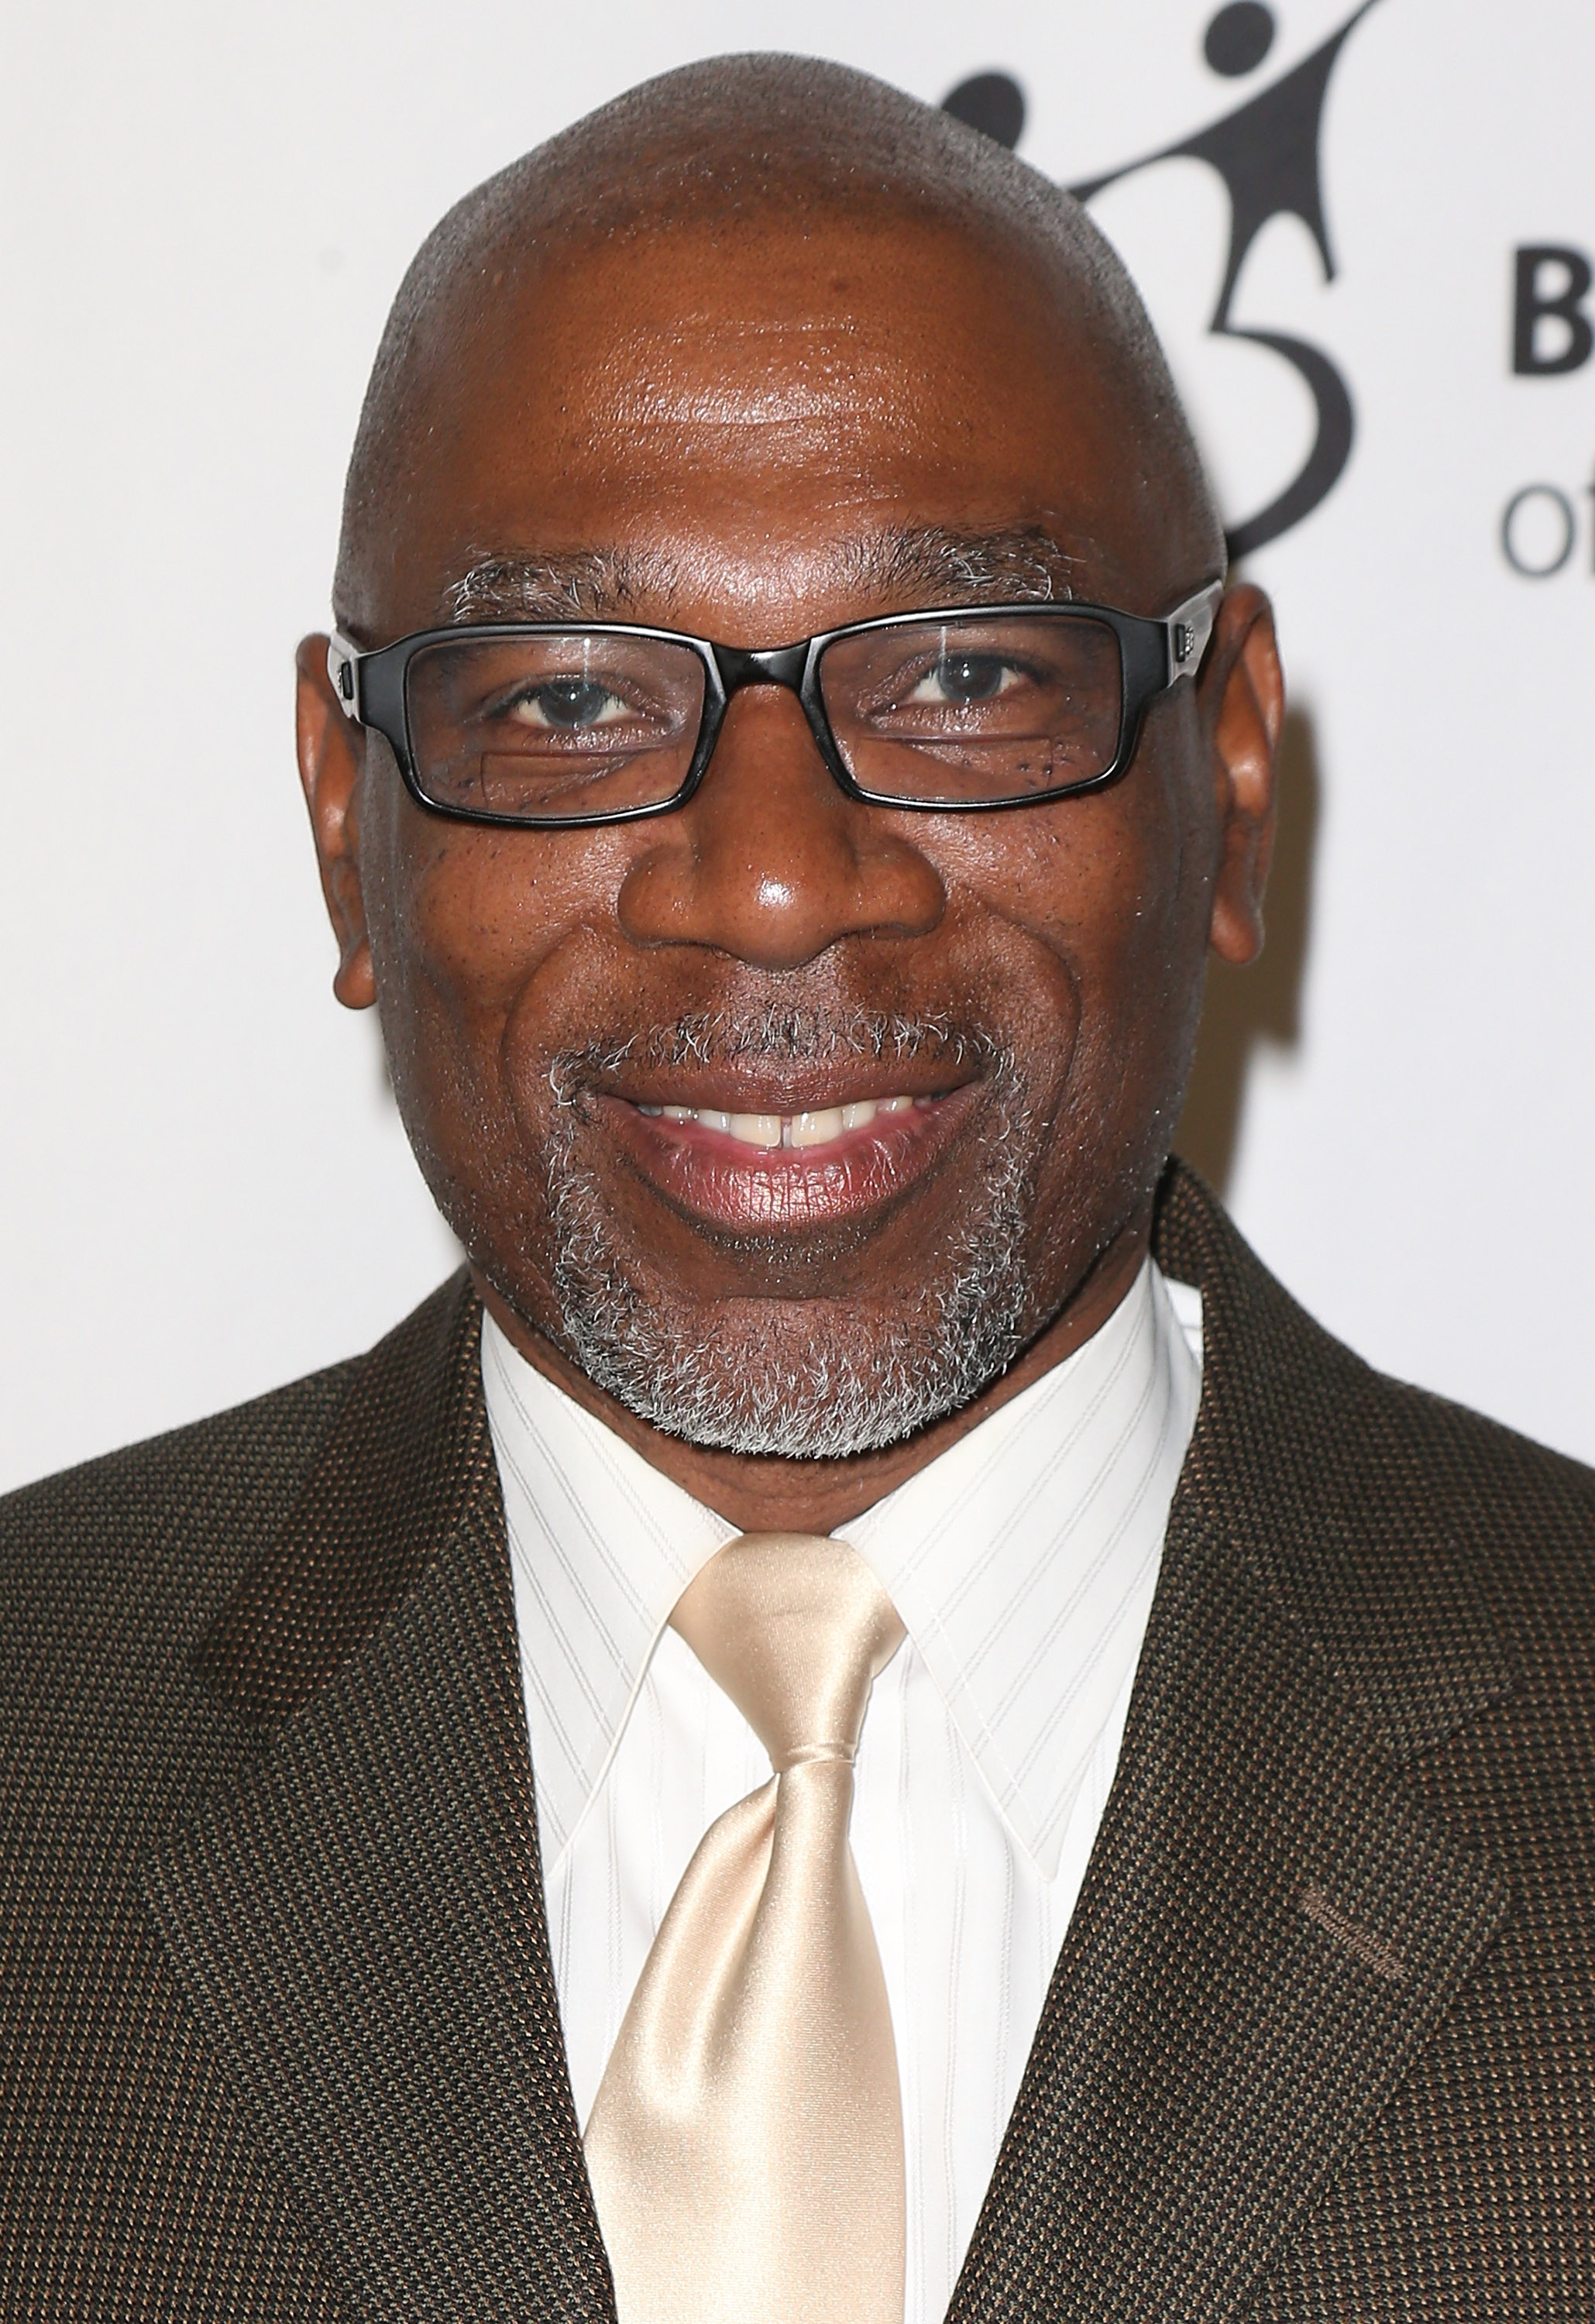 Alfonso Freeman at the BBBSLA annual Accessories for Success spring luncheon & fashion show in Beverly Hills, California on April 12, 2013 | Source: Getty Images